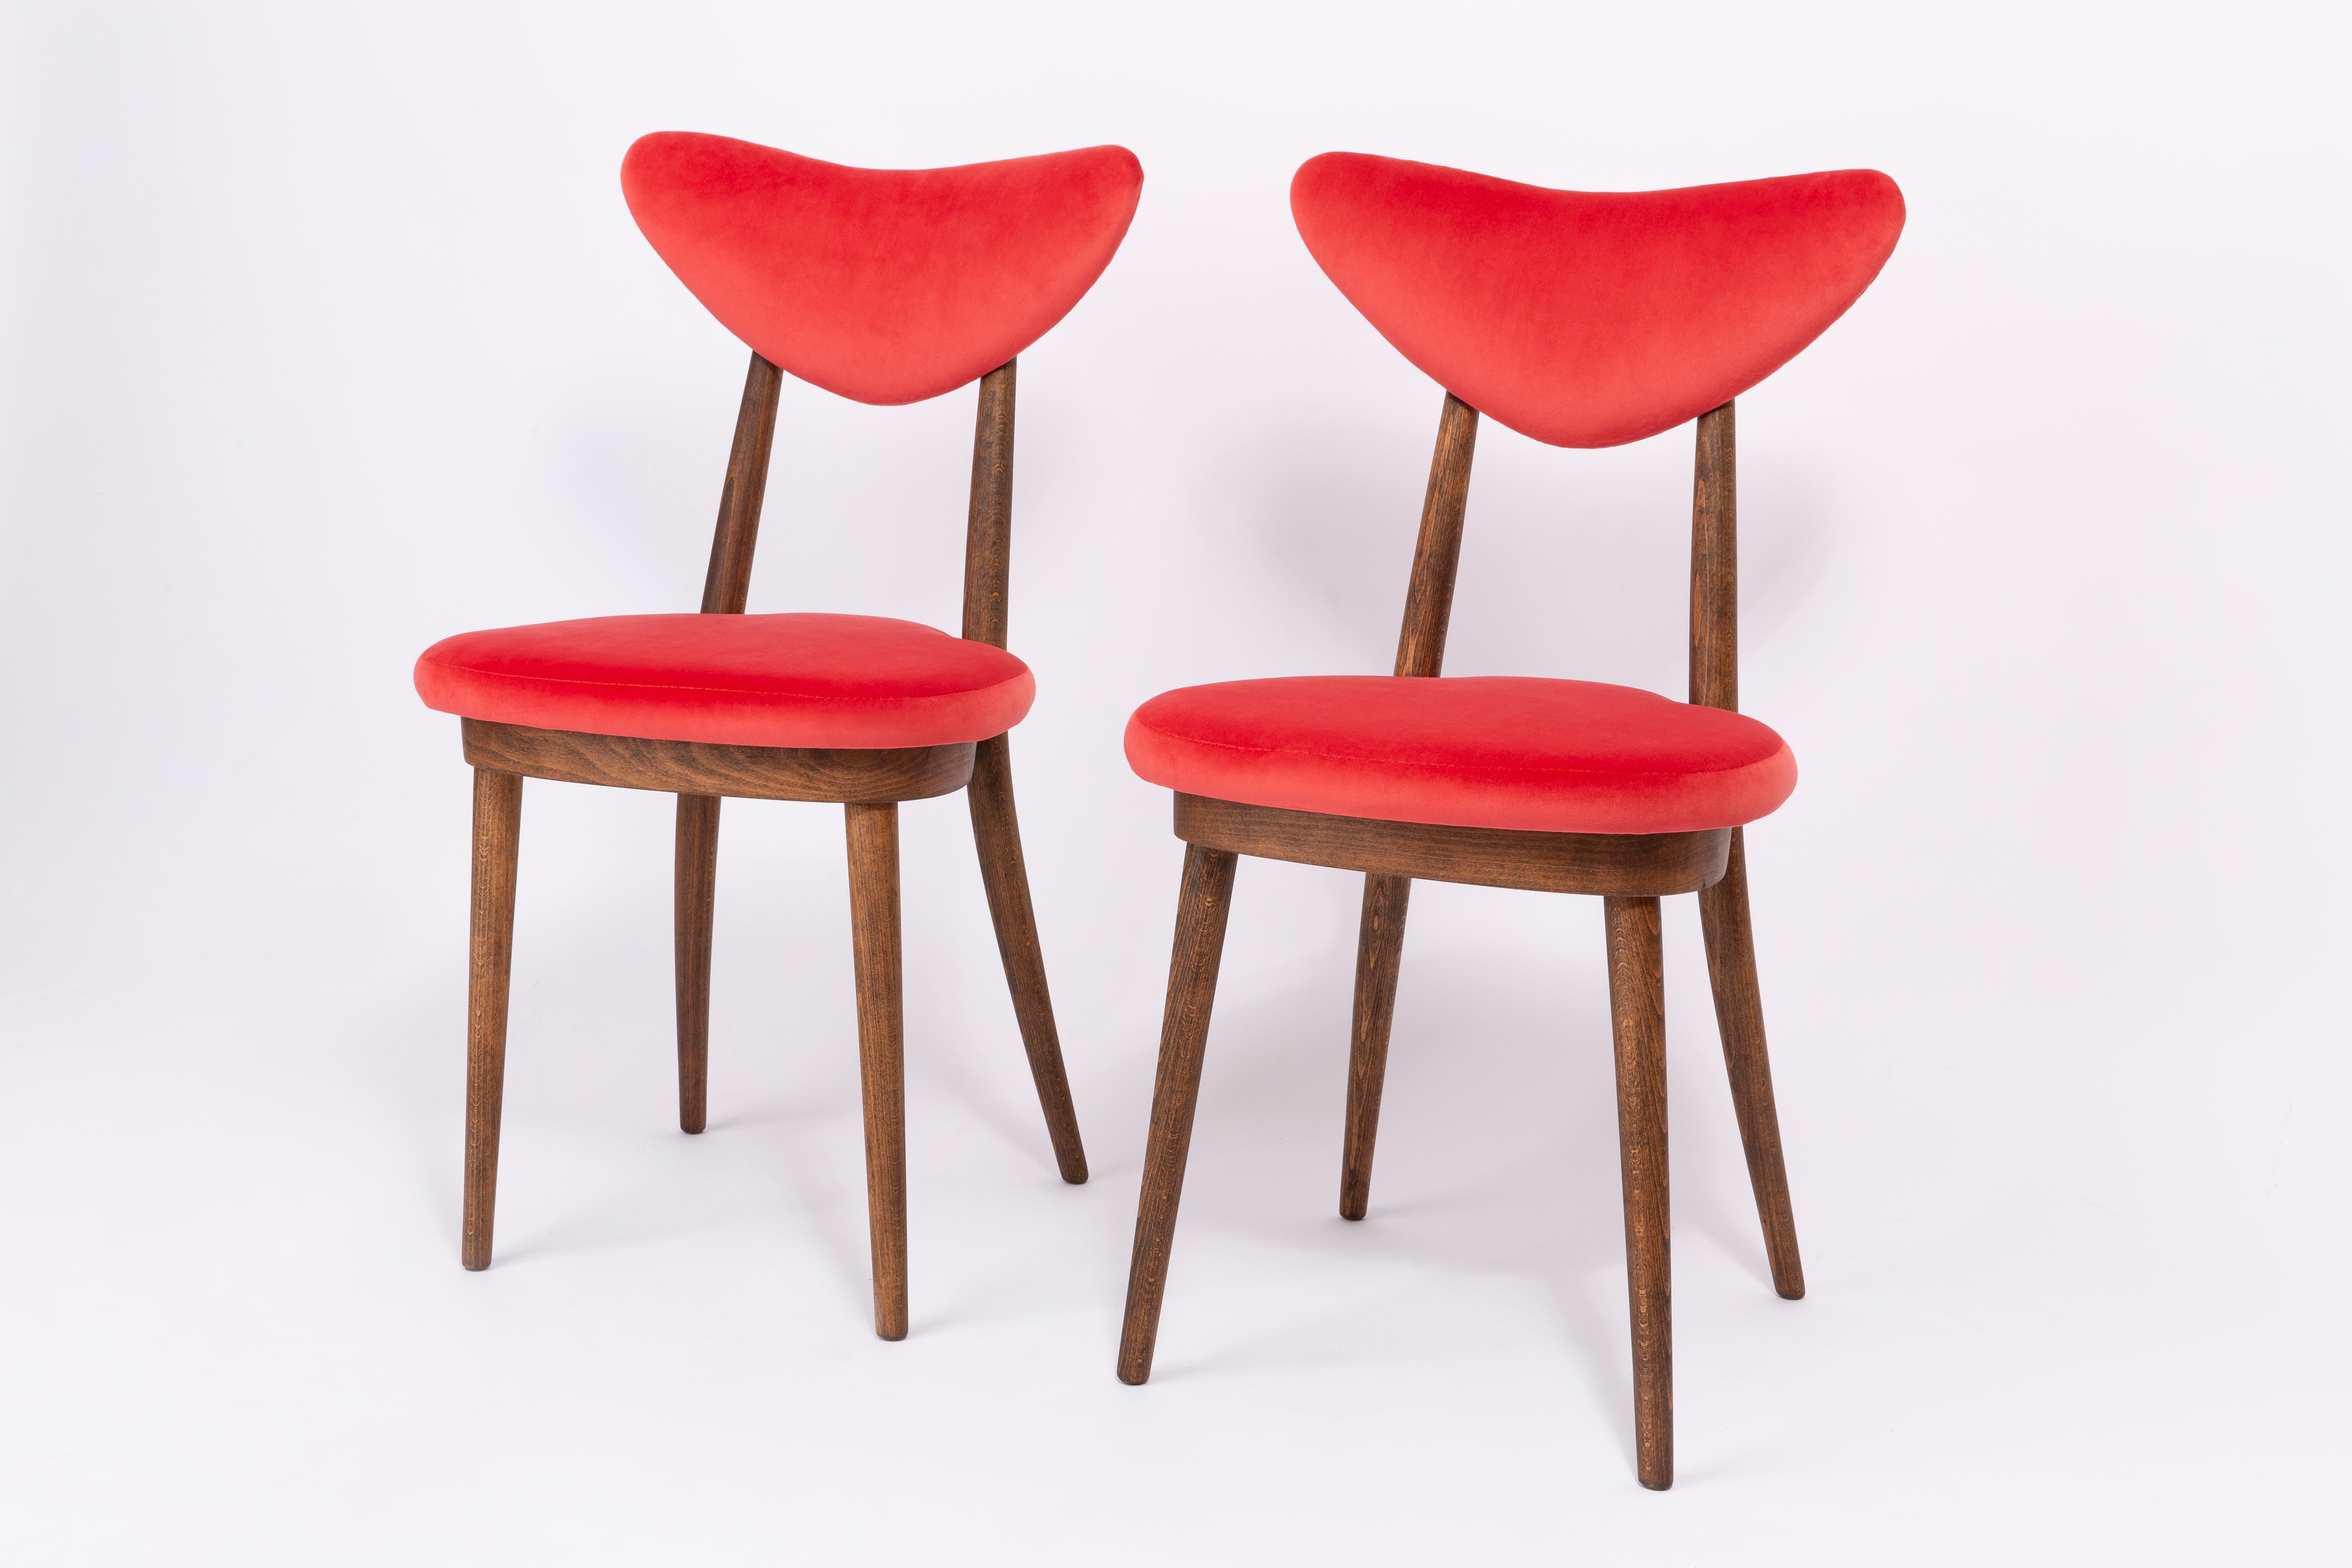 Polish Pair of Red Heart Chairs, Poland, 1960s For Sale